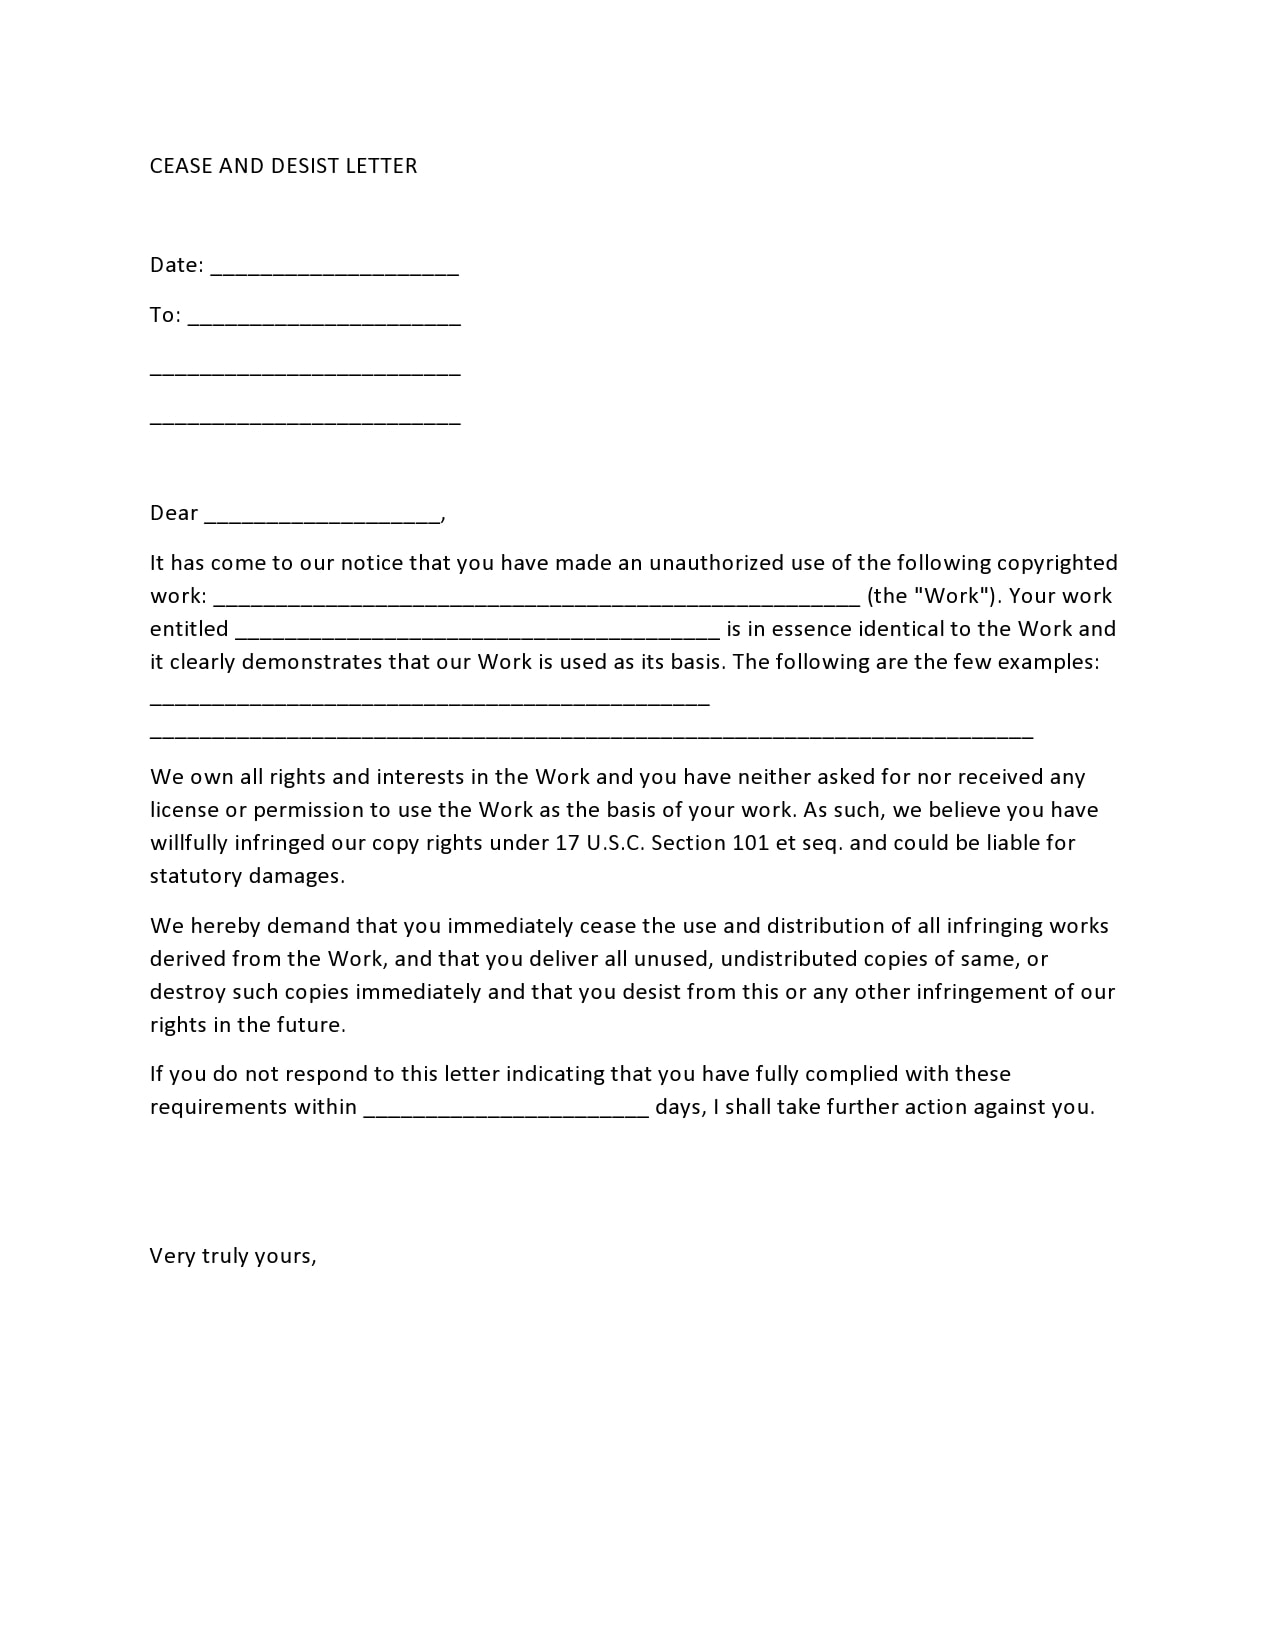 23 Free Cease and Desist Letter Templates - TemplateArchive